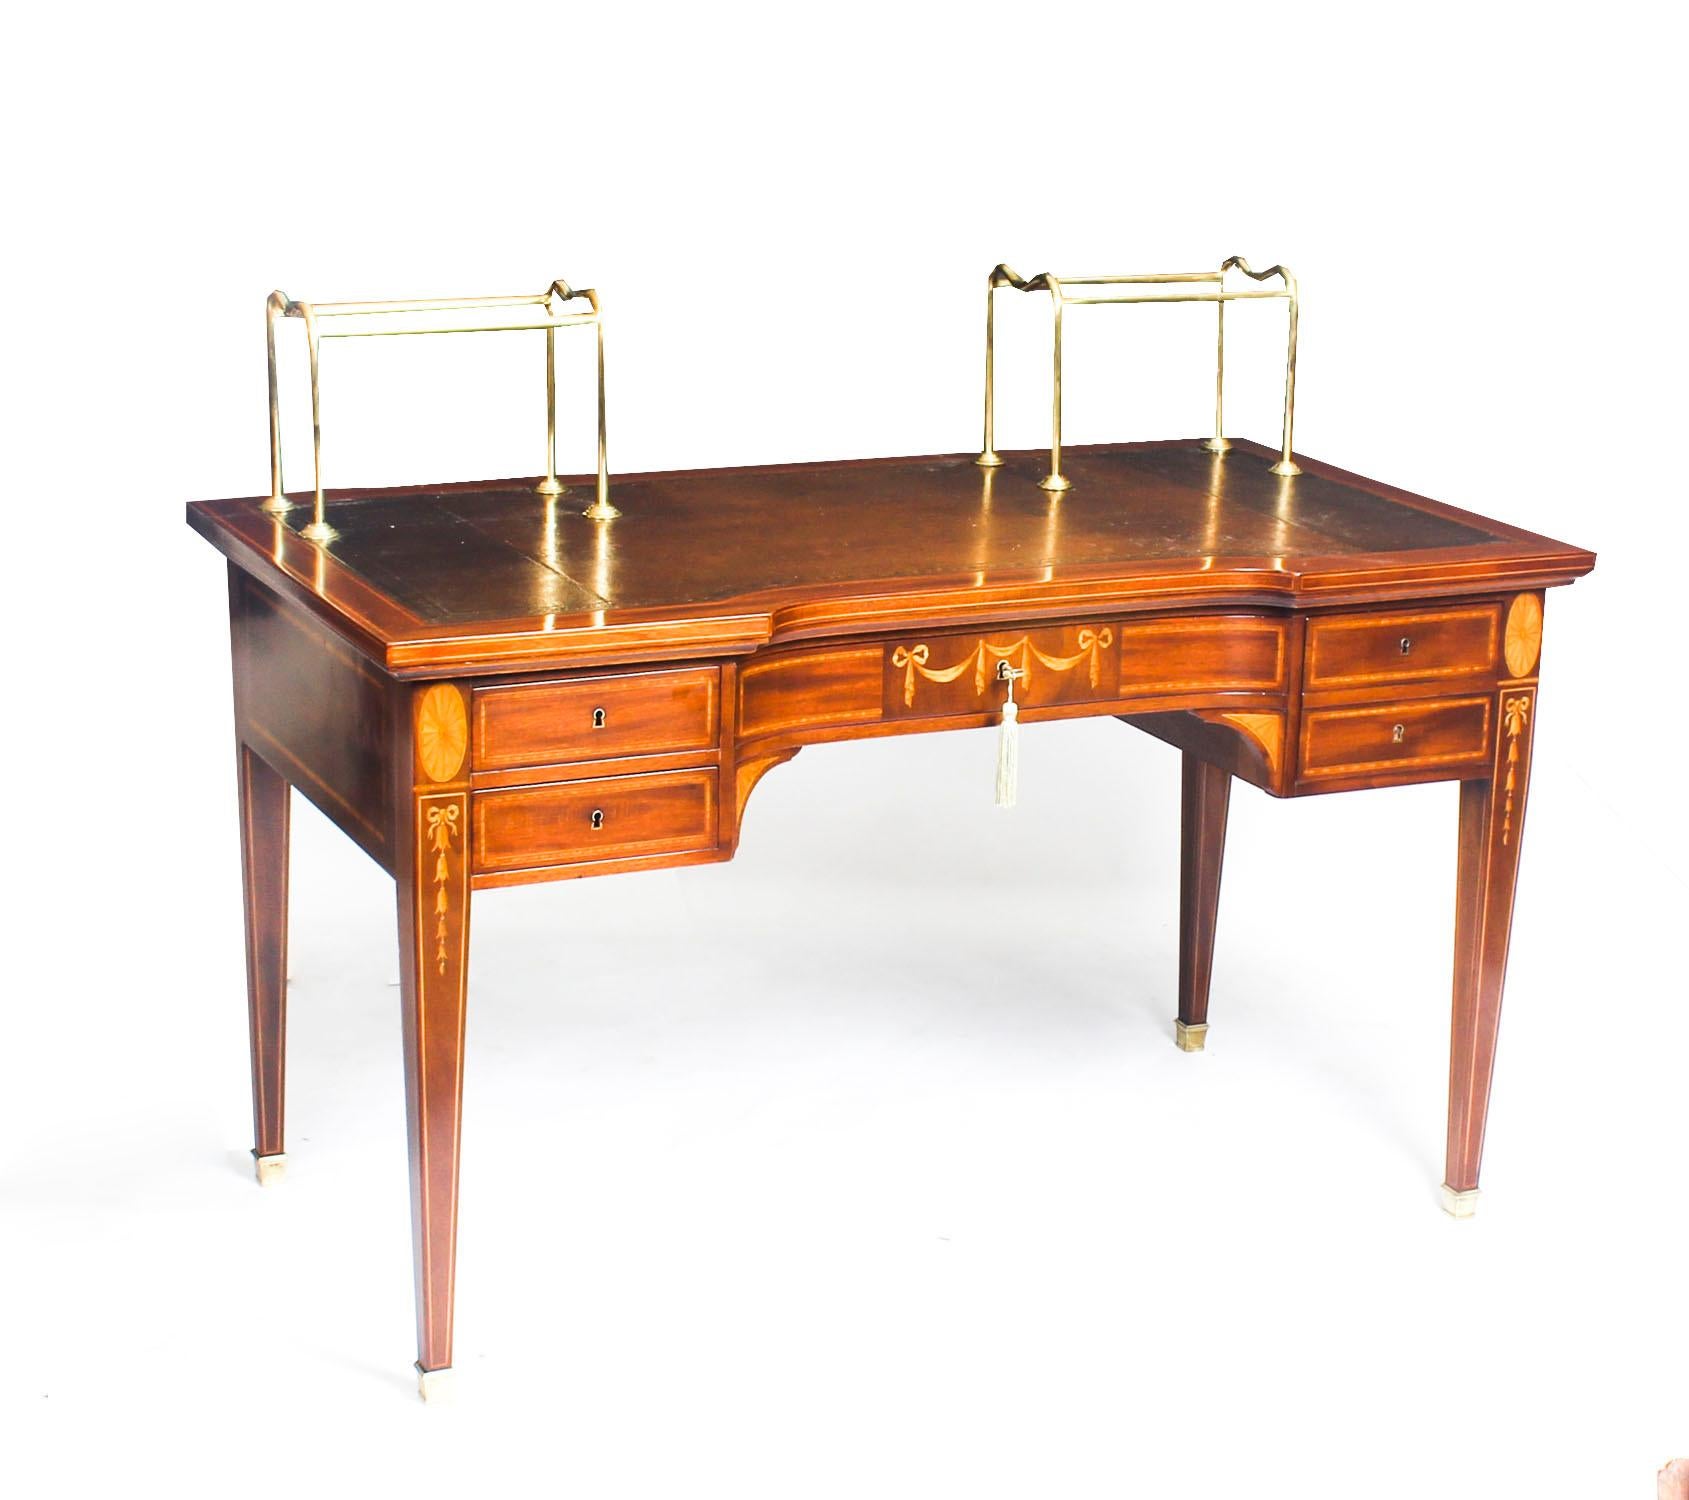 This is a stunning antique writing desk which is crafted from the most beautiful mahogany with fabulous inlaid marquetry decoration, circa 1880 in date.

It has been wonderfully inlaid by a master craftsman with garlands, bell flowers and shells.